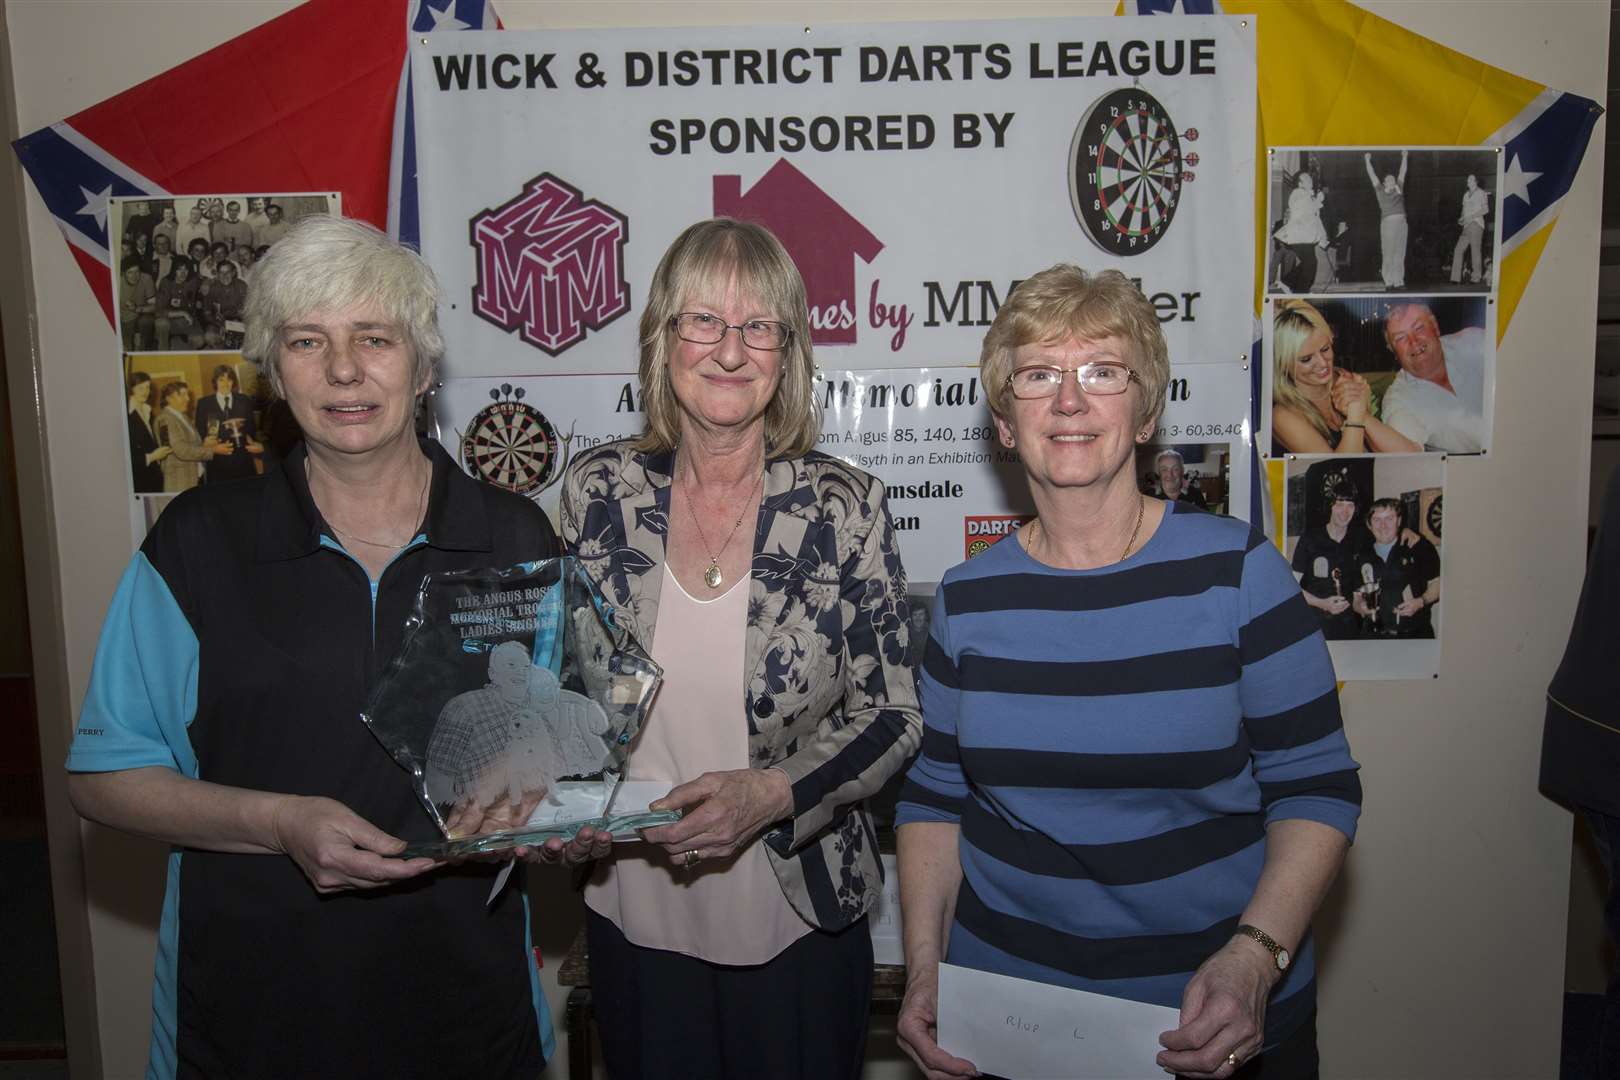 Freda Perry (left), of the Queen's, won the ladies' section of Angus Ross memorial trophy competition played in Harper's Bar on Saturday. The trophy was handed over by Angus's widow, Marina. Runner-up was Ann Wells (Seaforth). Picture: Robert MacDonald / Northern Studios